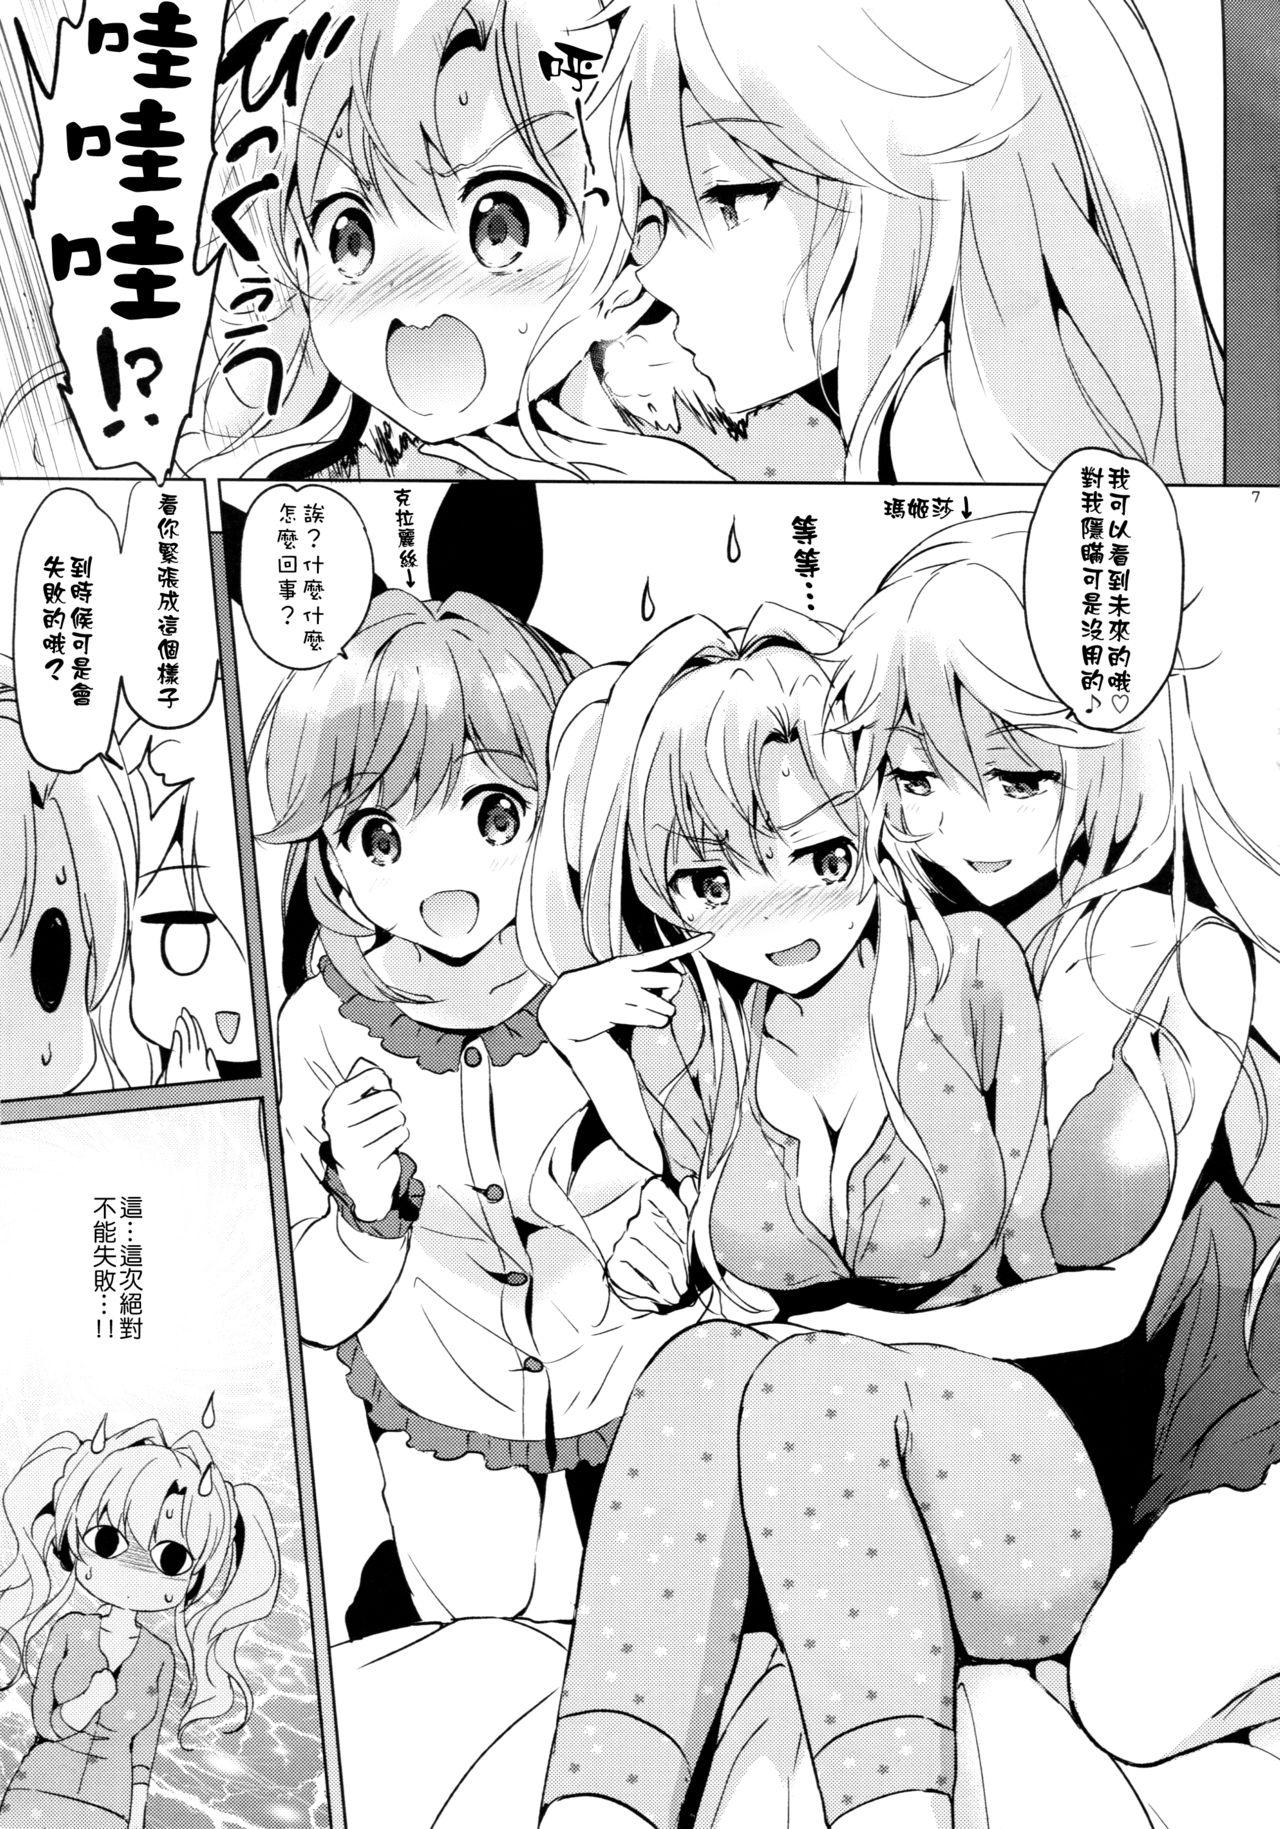 Her ReaJuu Fantasy Z 2 - Granblue fantasy Tanned - Page 7